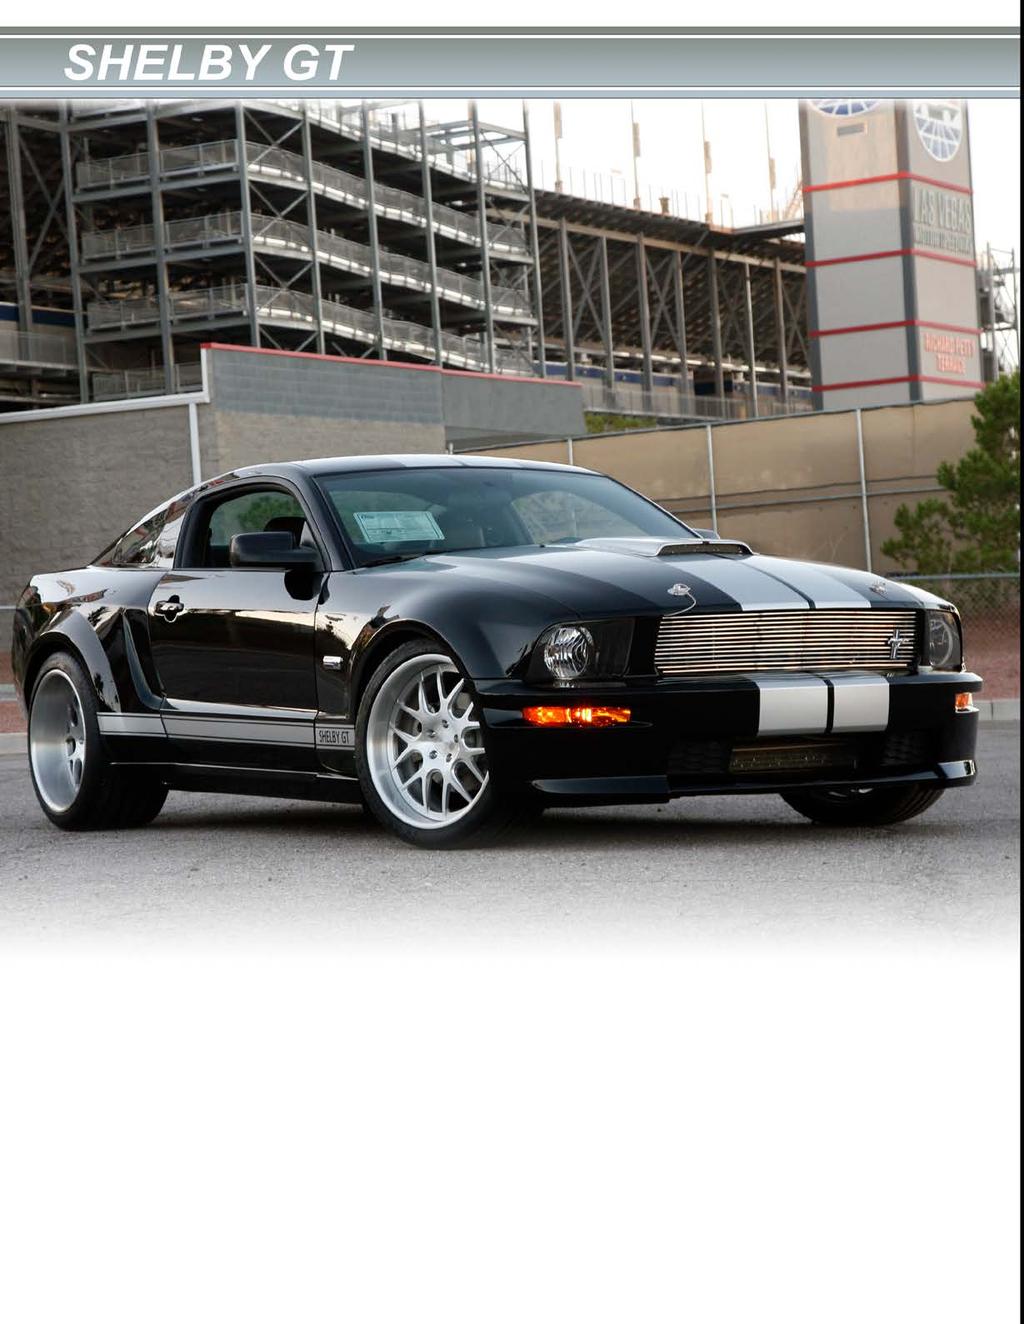 2007 Shelby GT Prototype CSM - 07SGT02P Asking Price - $175,000 This car is a company demonstrator and development car. It was featured in much of the original sales and promotional materials.